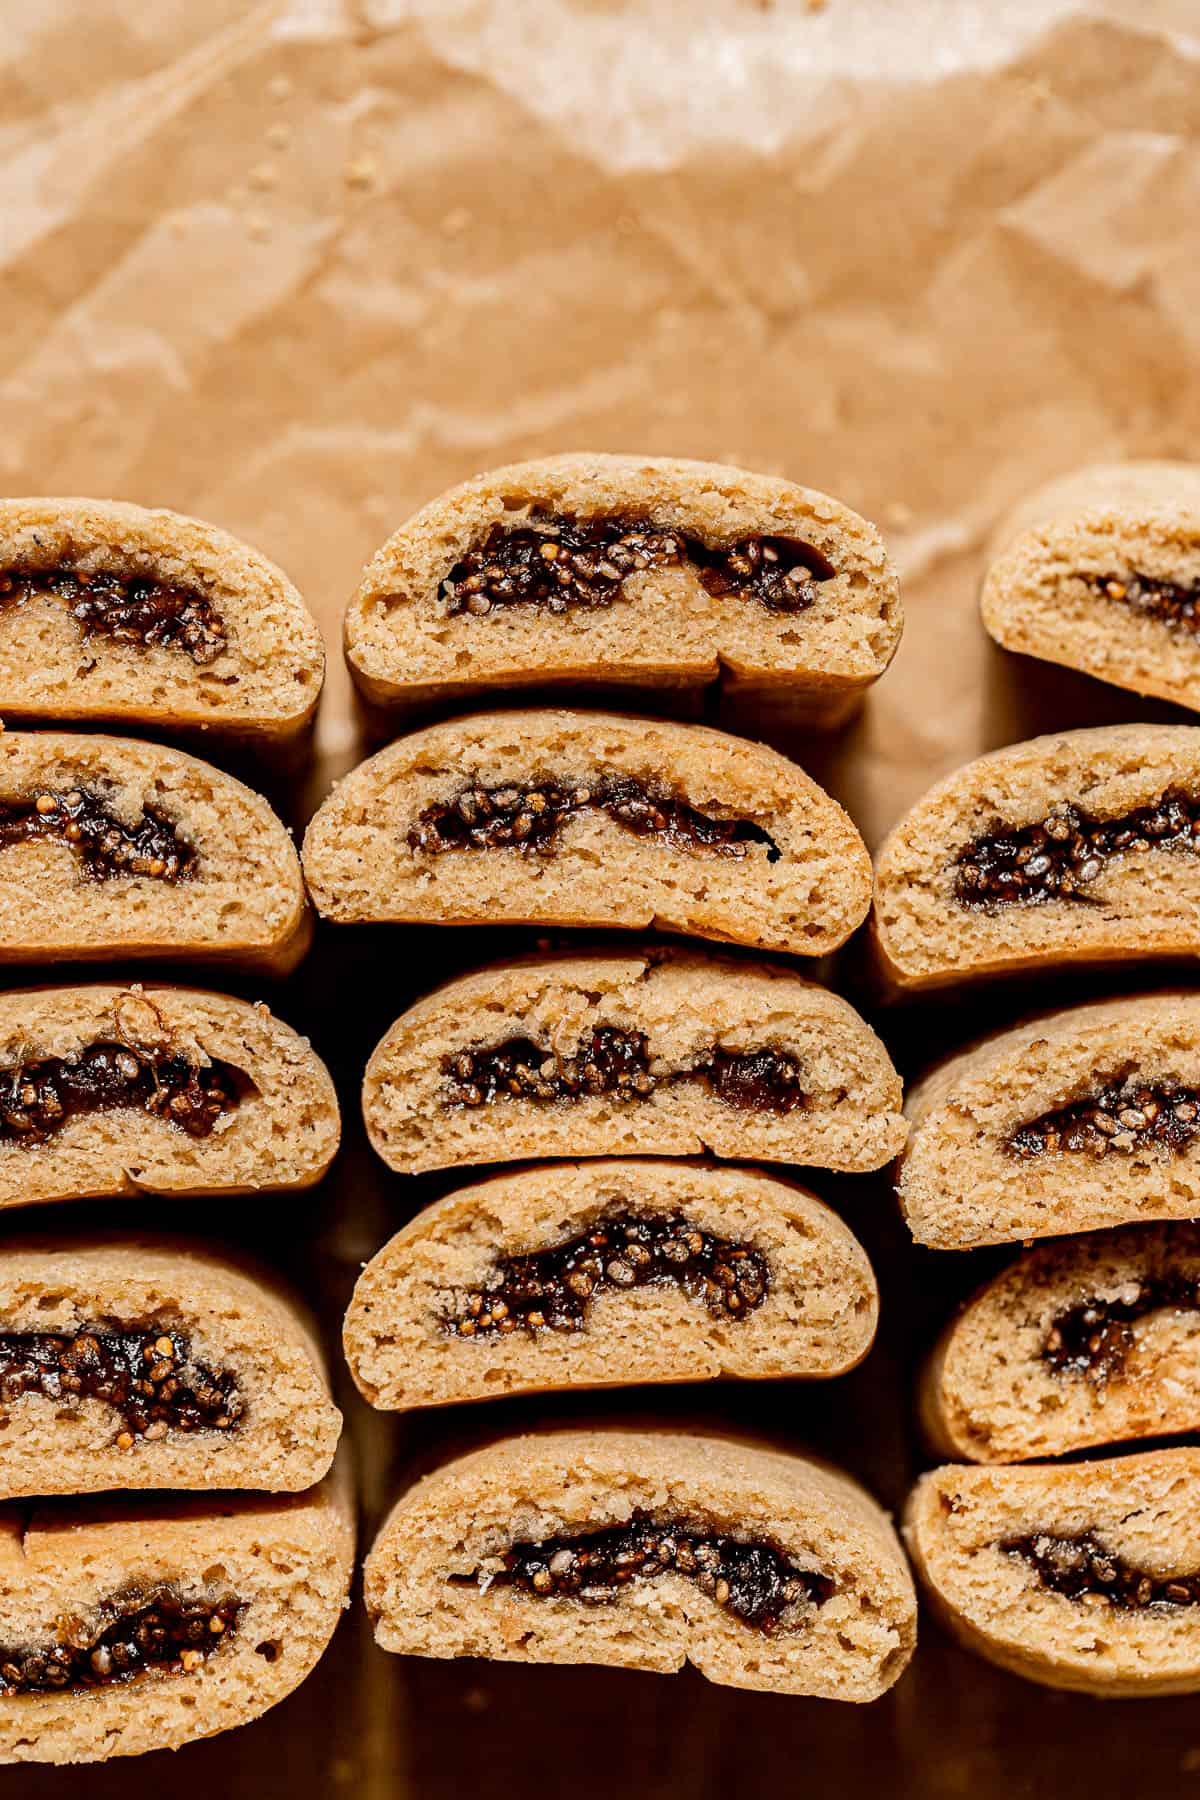 fig cookies lined up to show inside filling.